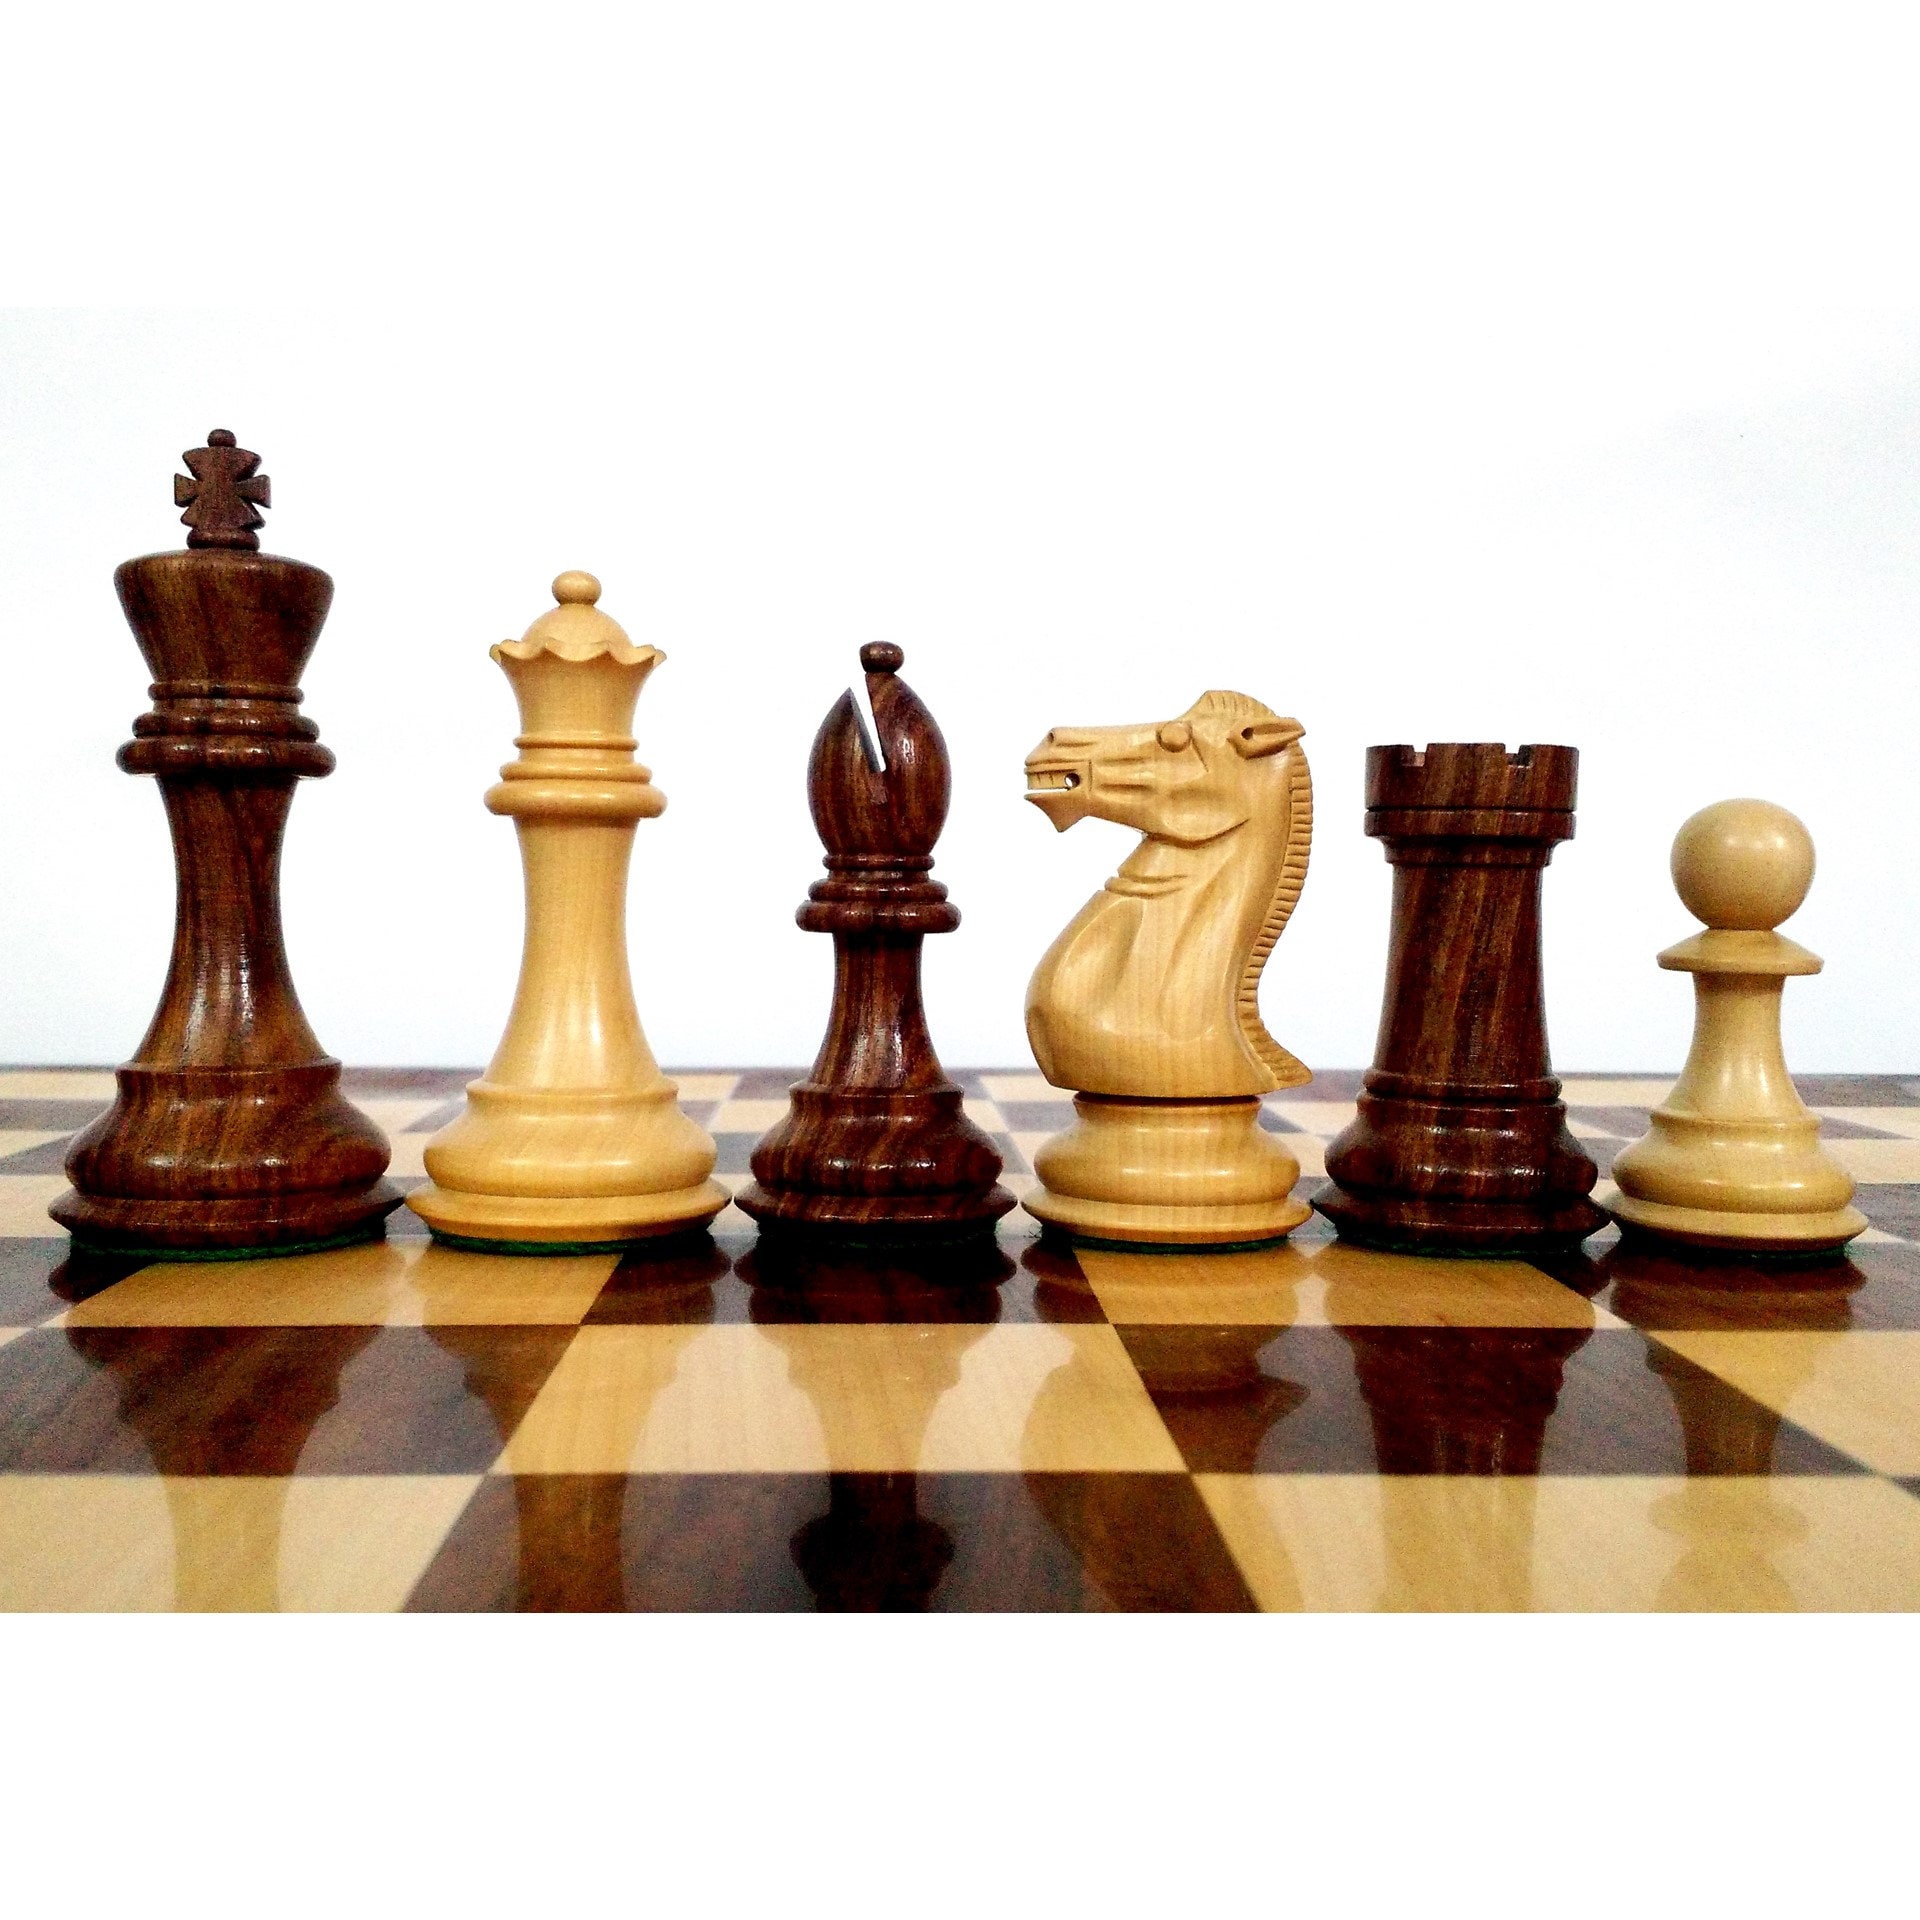  The House of Staunton Four Player Chess Set Combination -  Triple Weighted Regulation Colored Chess Pieces, Four Player Vinyl Chess  Board : Toys & Games